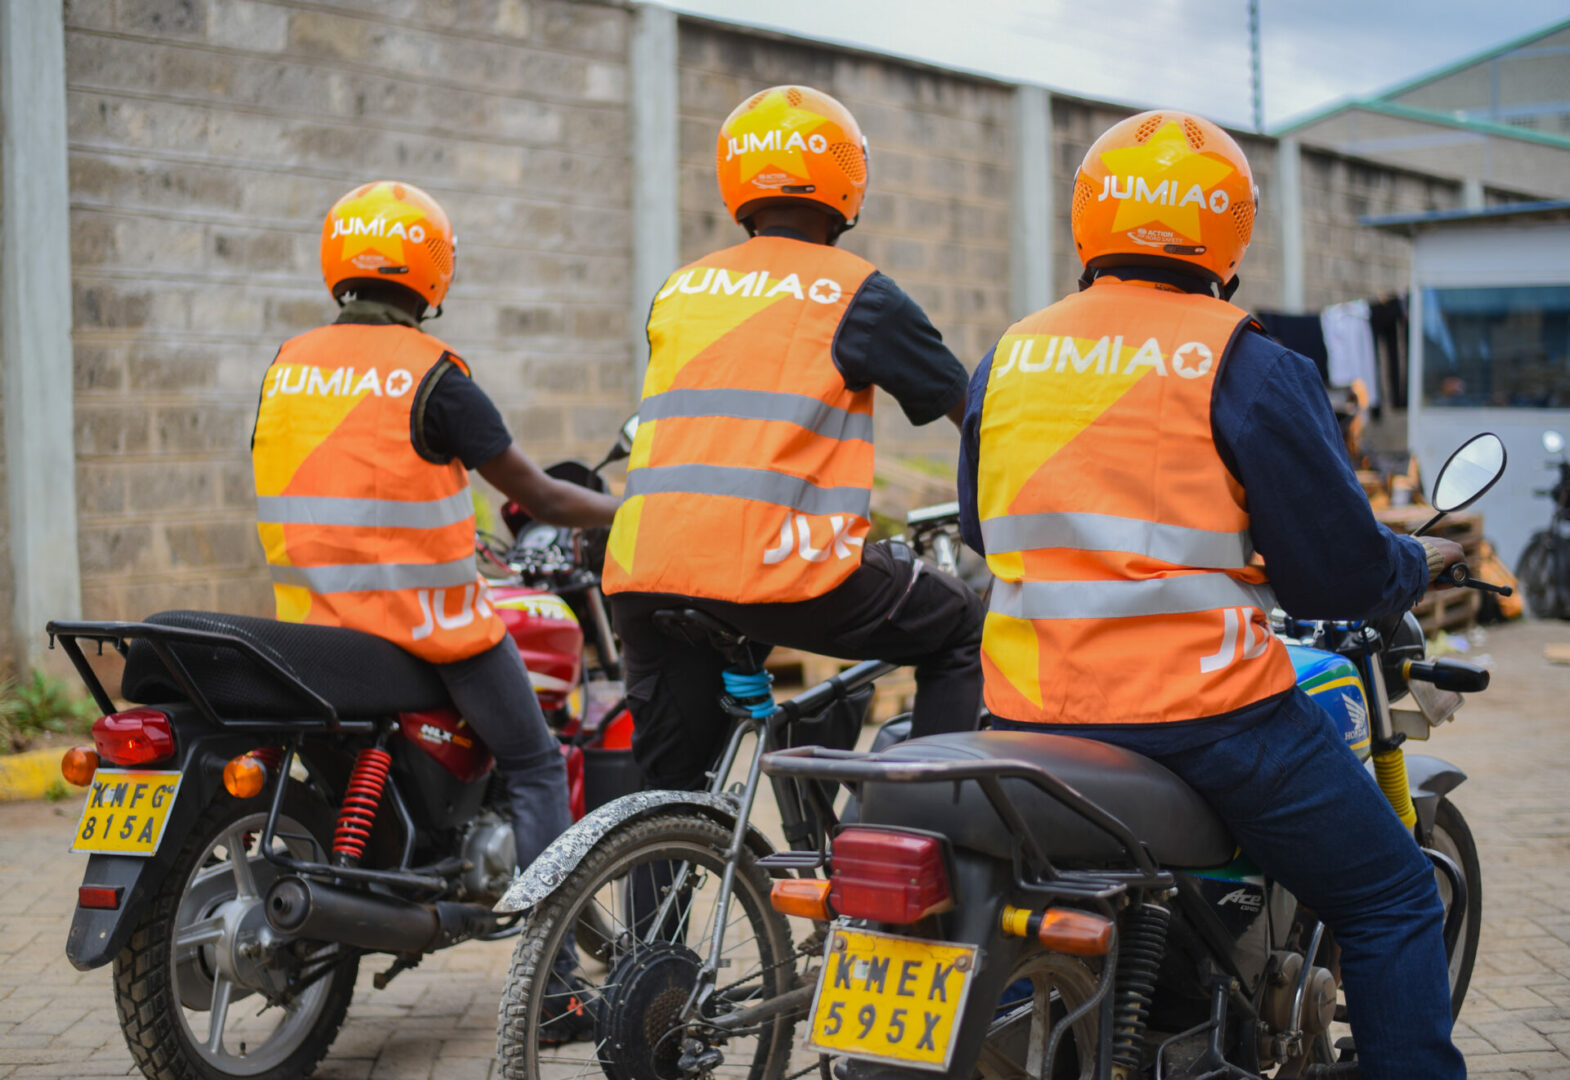 Jumia Gives High-quality Helmets to its Delivery Associates to support road safety - Bizna Kenya